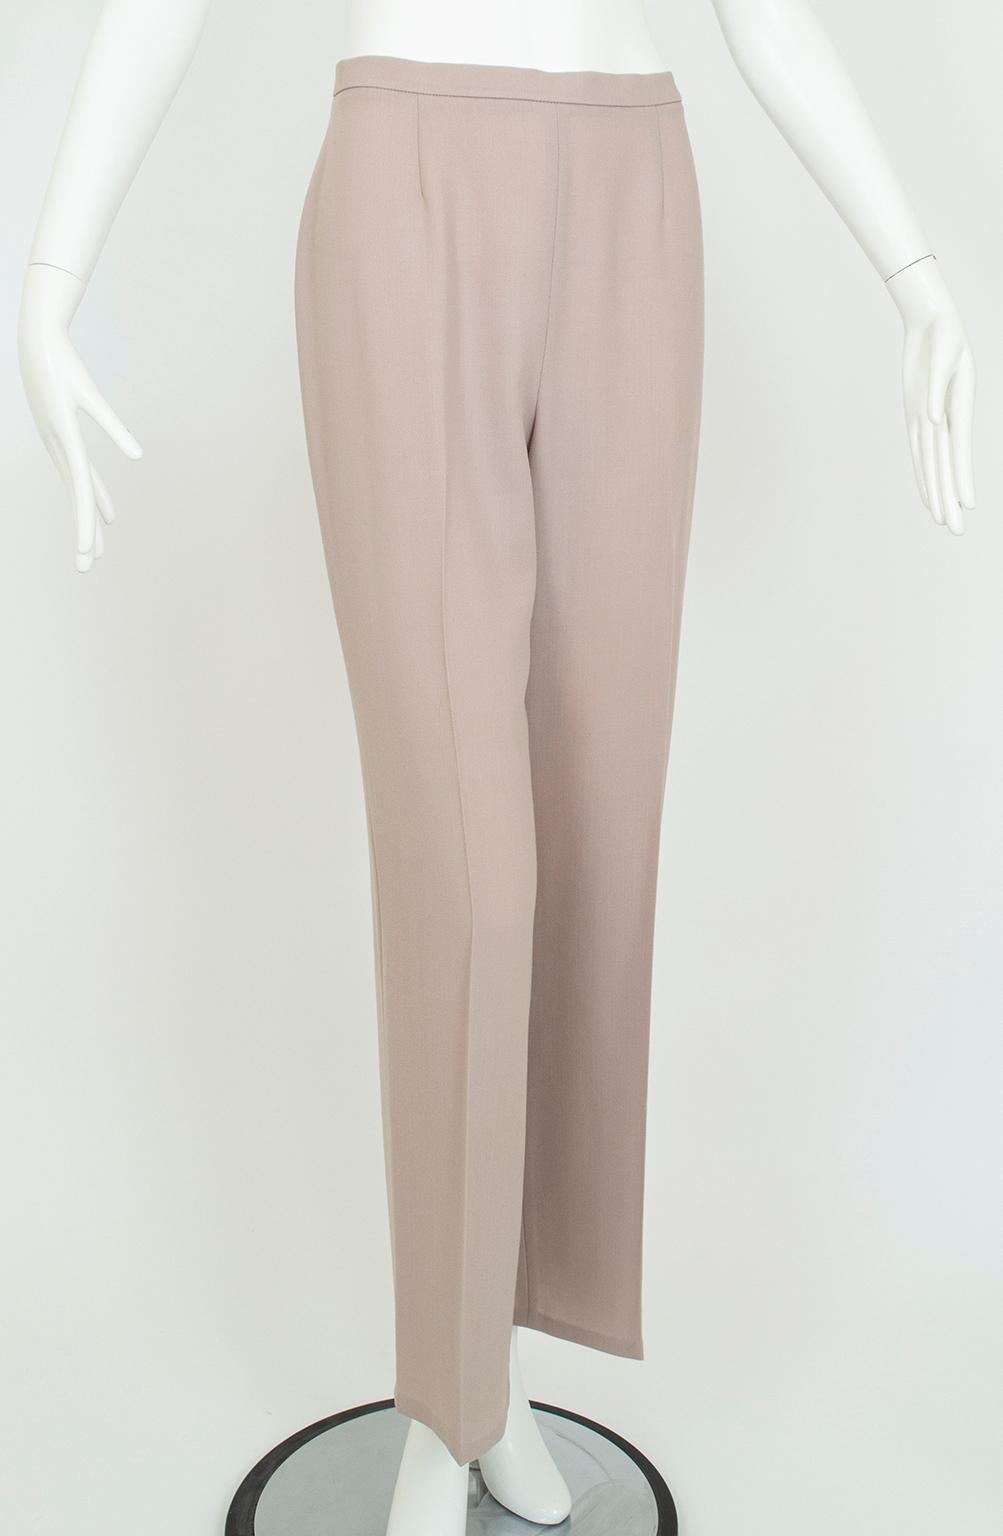 Max Mara Taupe Wool and Silk Crêpe Belted Pant Suit - It 40 – 42, 1990s For Sale 7